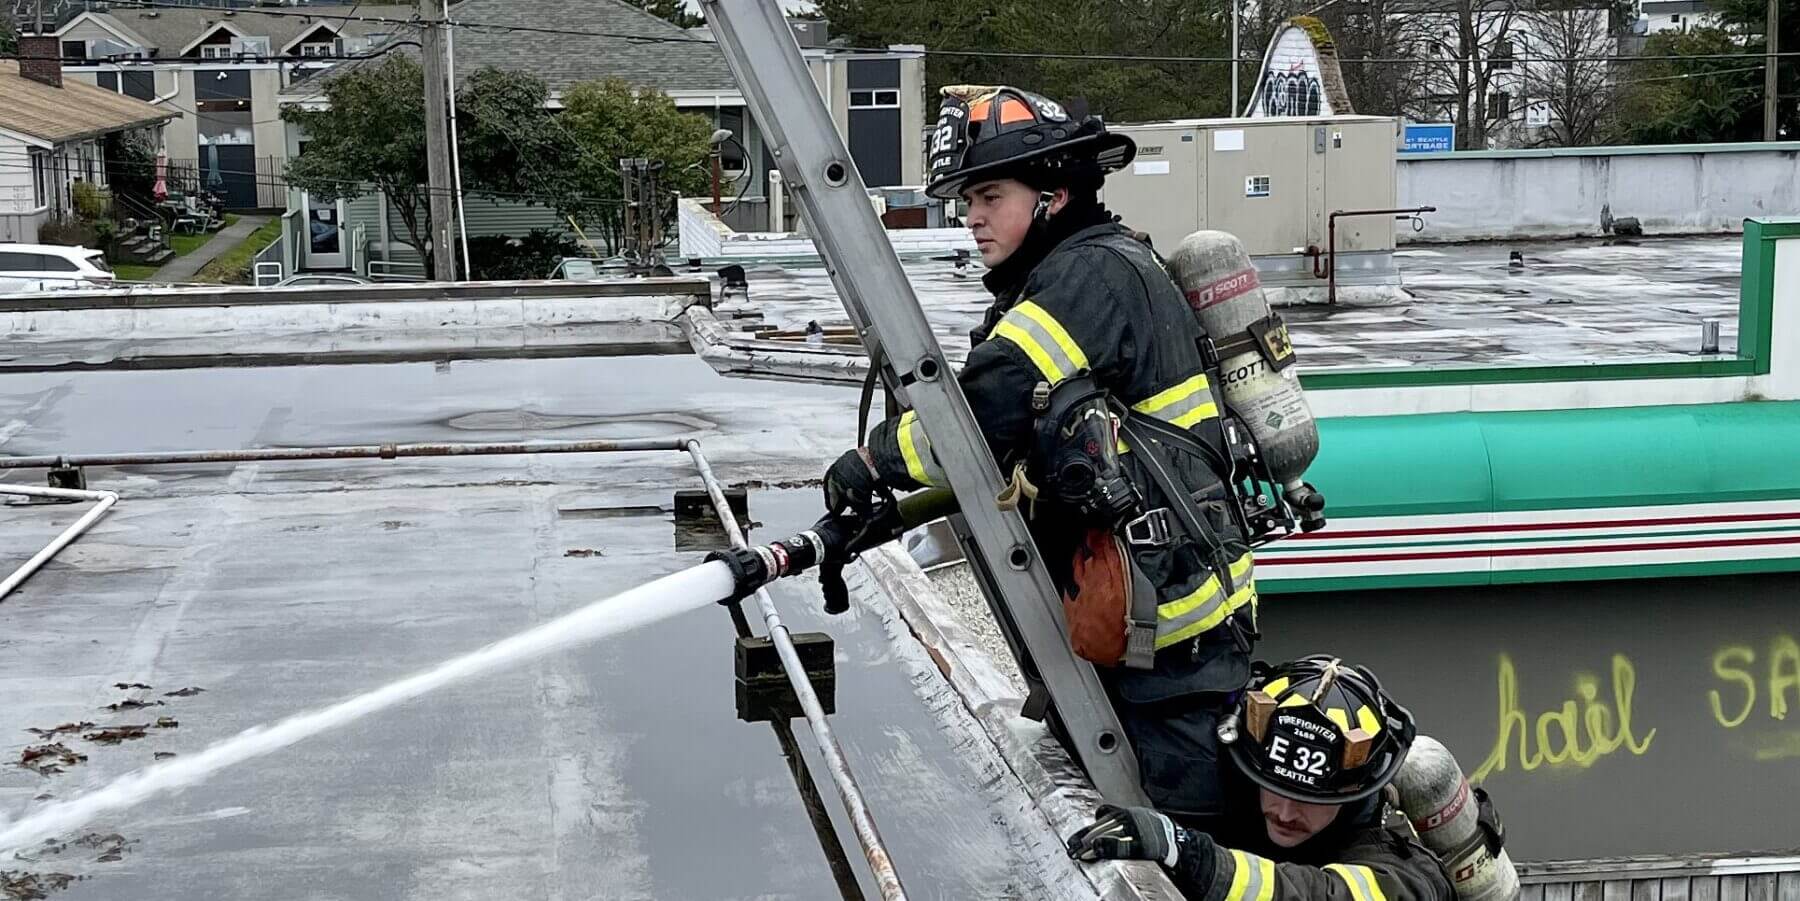 Firefighter “Industrial” Athletes